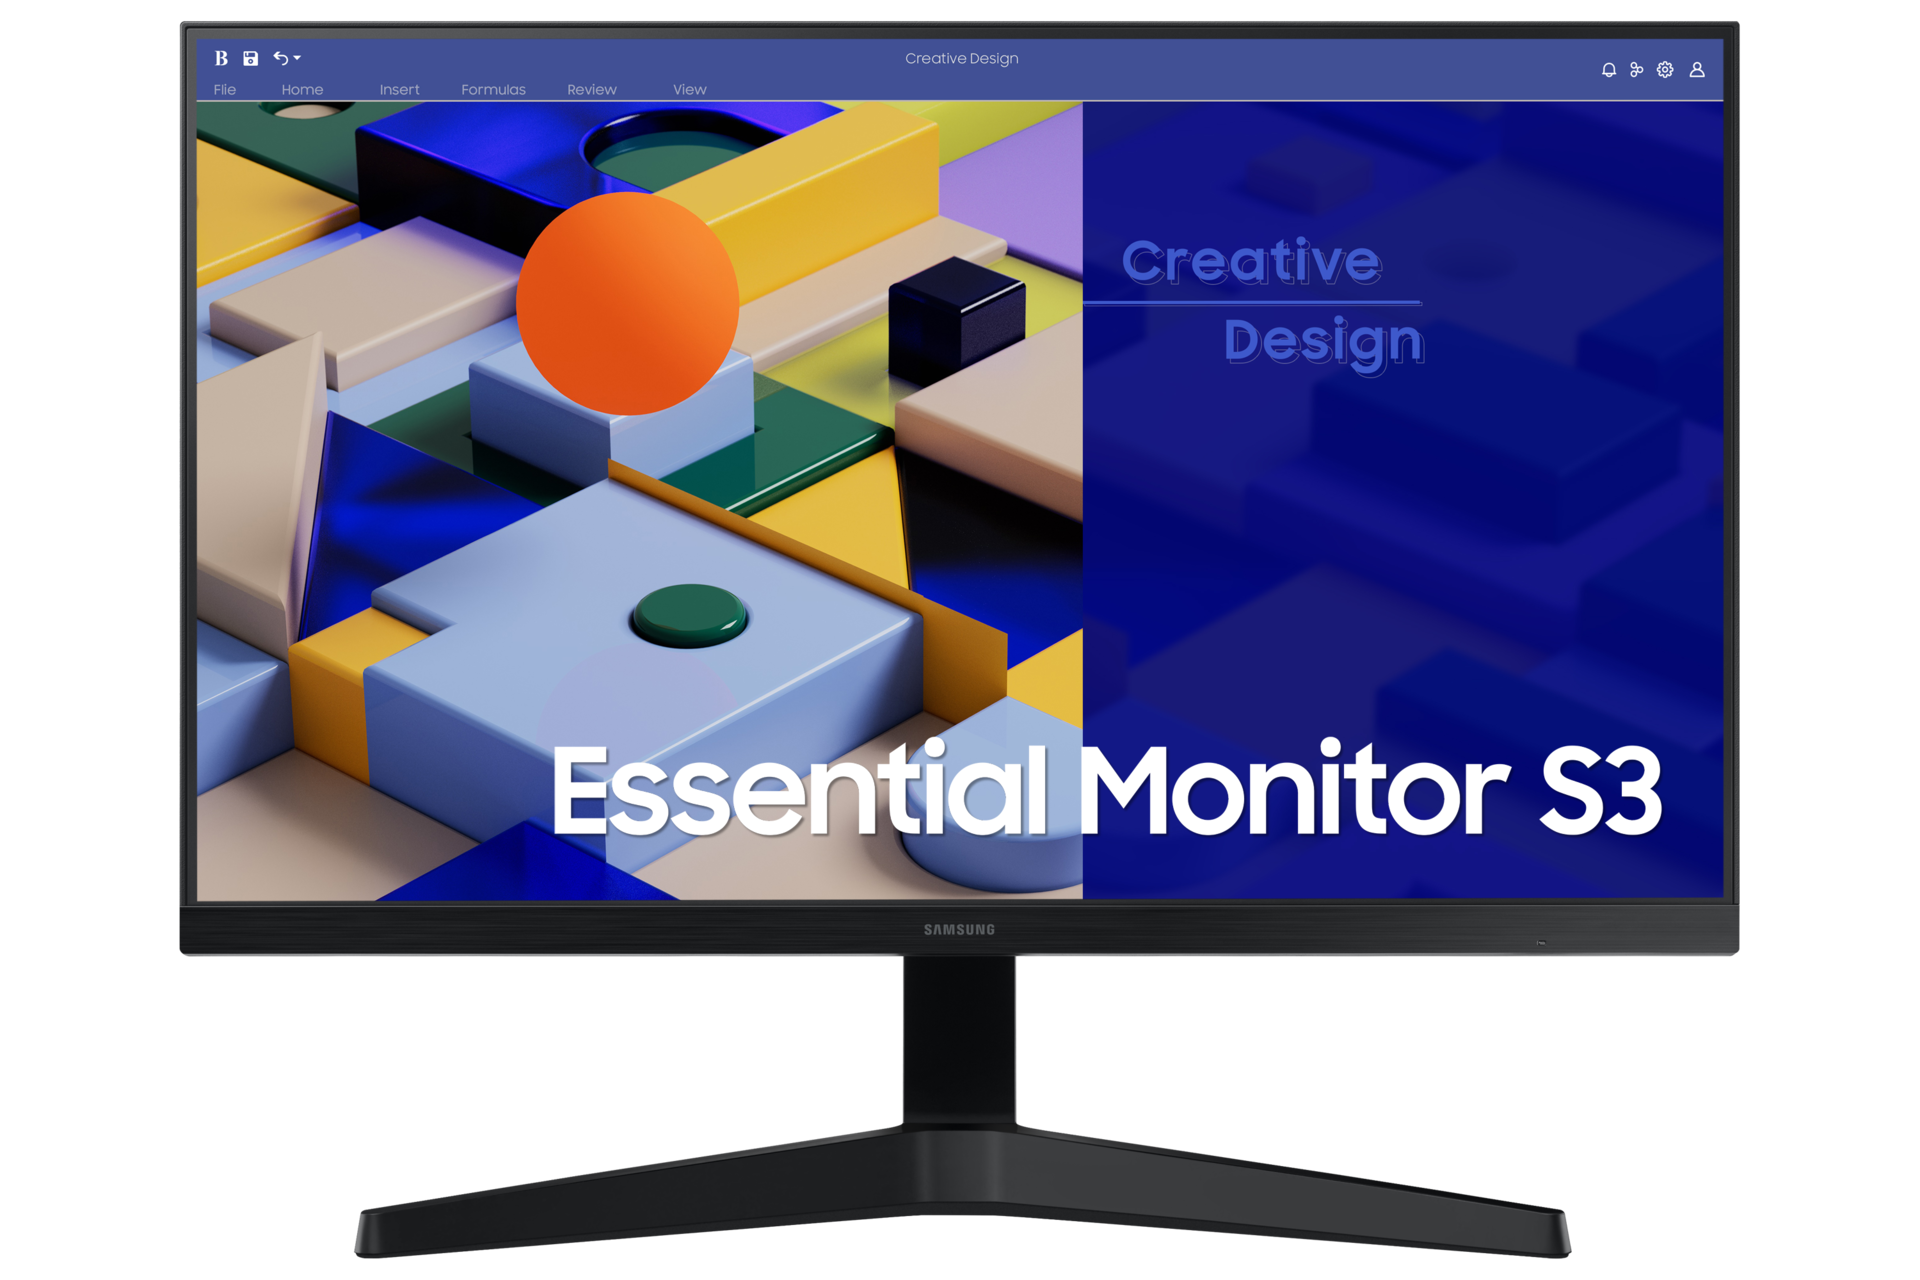 How to troubleshoot burn-in or image retention on your Samsung OLED monitor